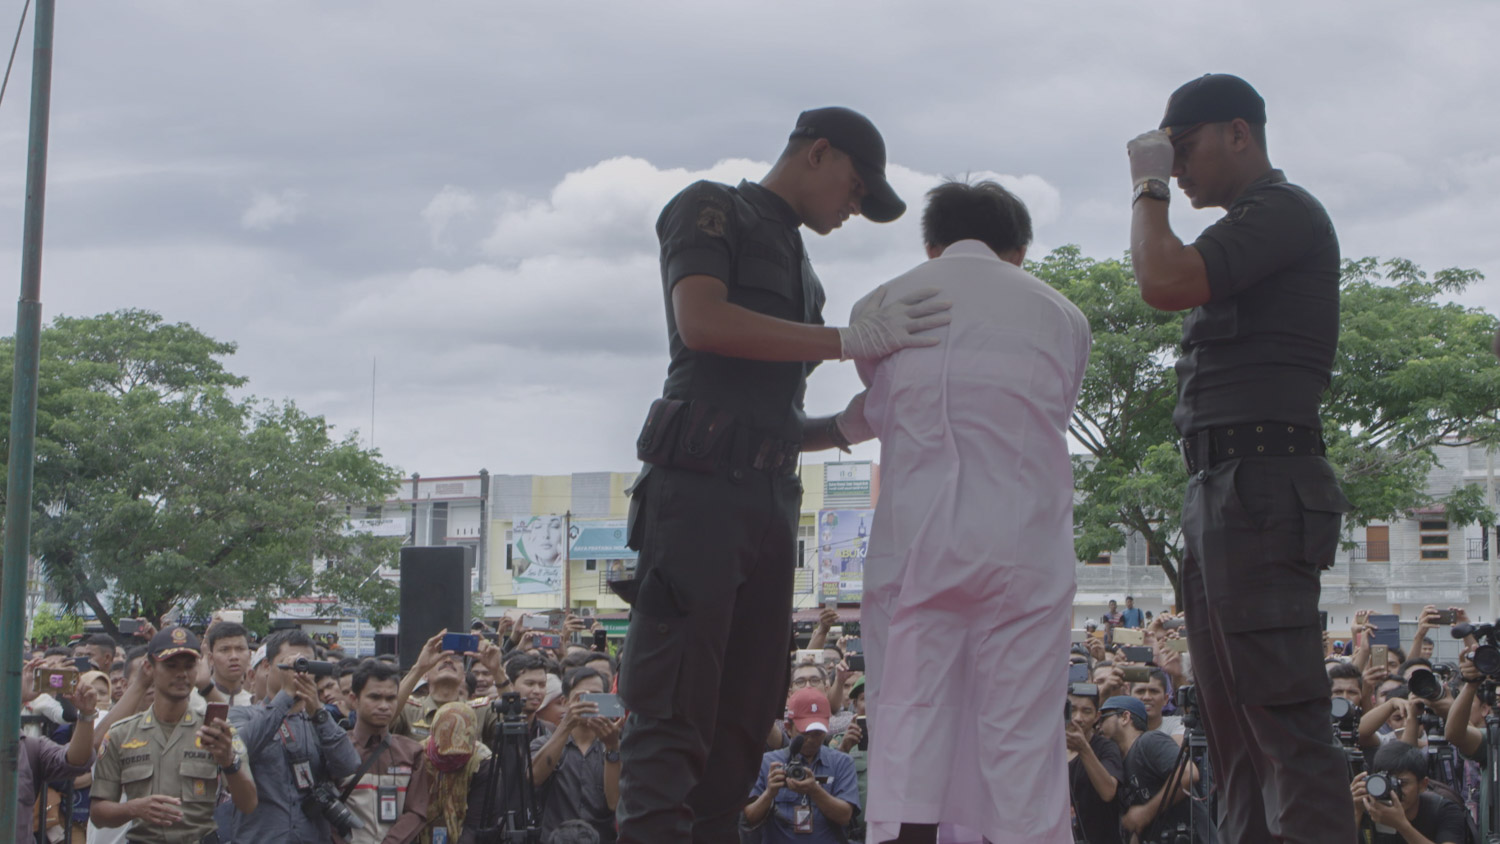 Ass Caning 100 Lashes - Gay Men Caned in Front of Cheering Crowd in Aceh - VICE